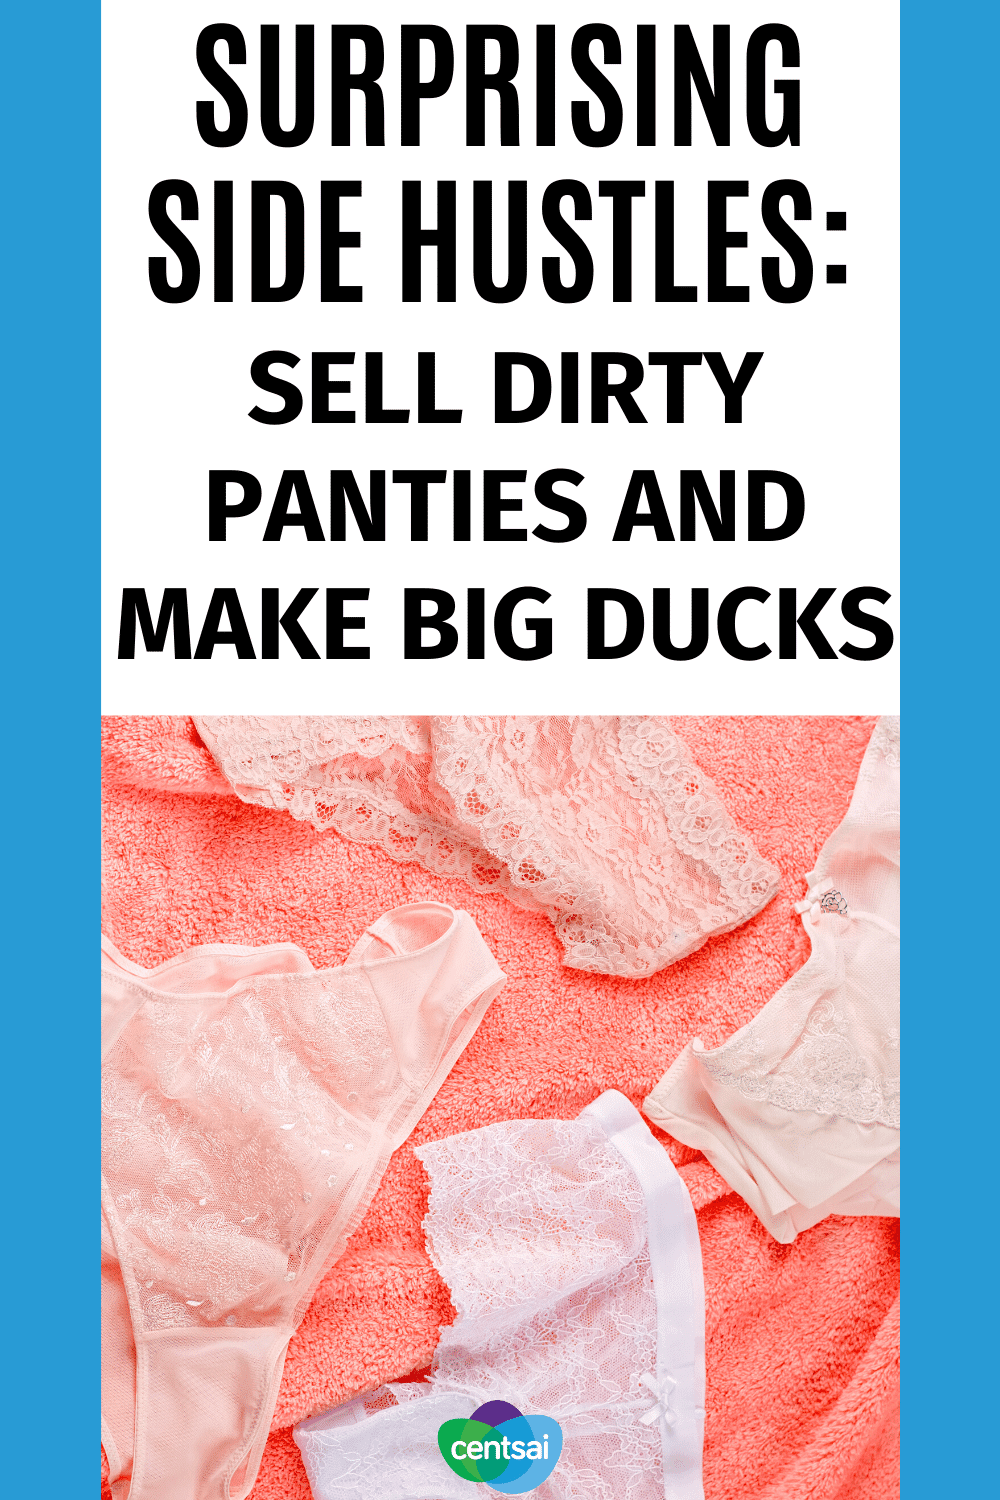 Dirty pantys for sale